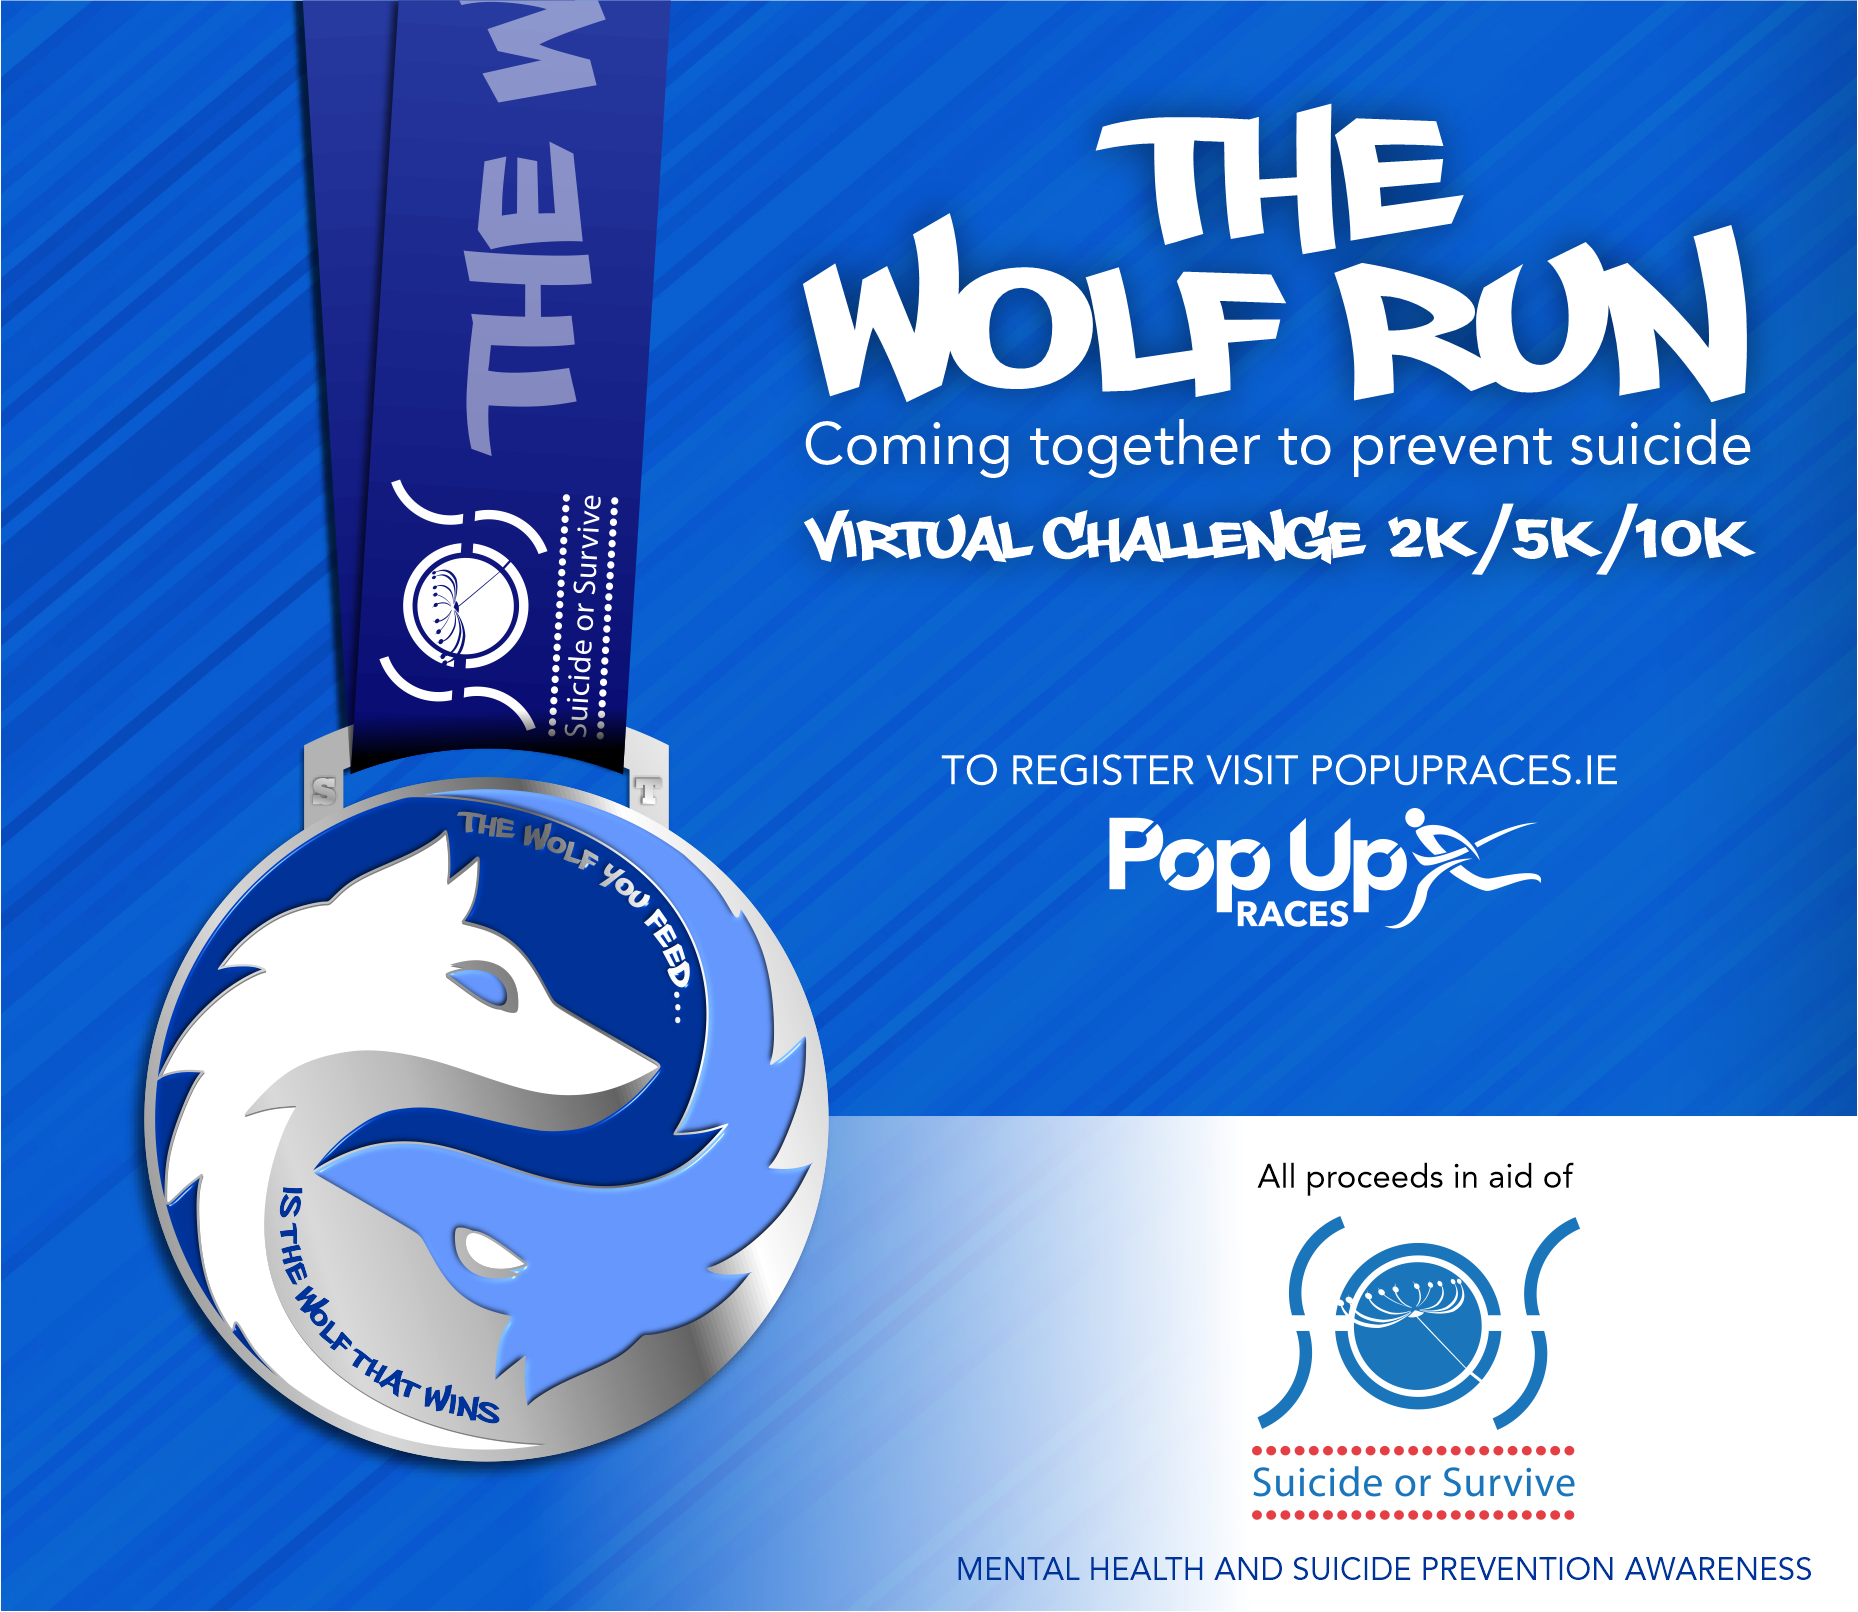 The Wolf Run Suicide or Survive Pop Up Races